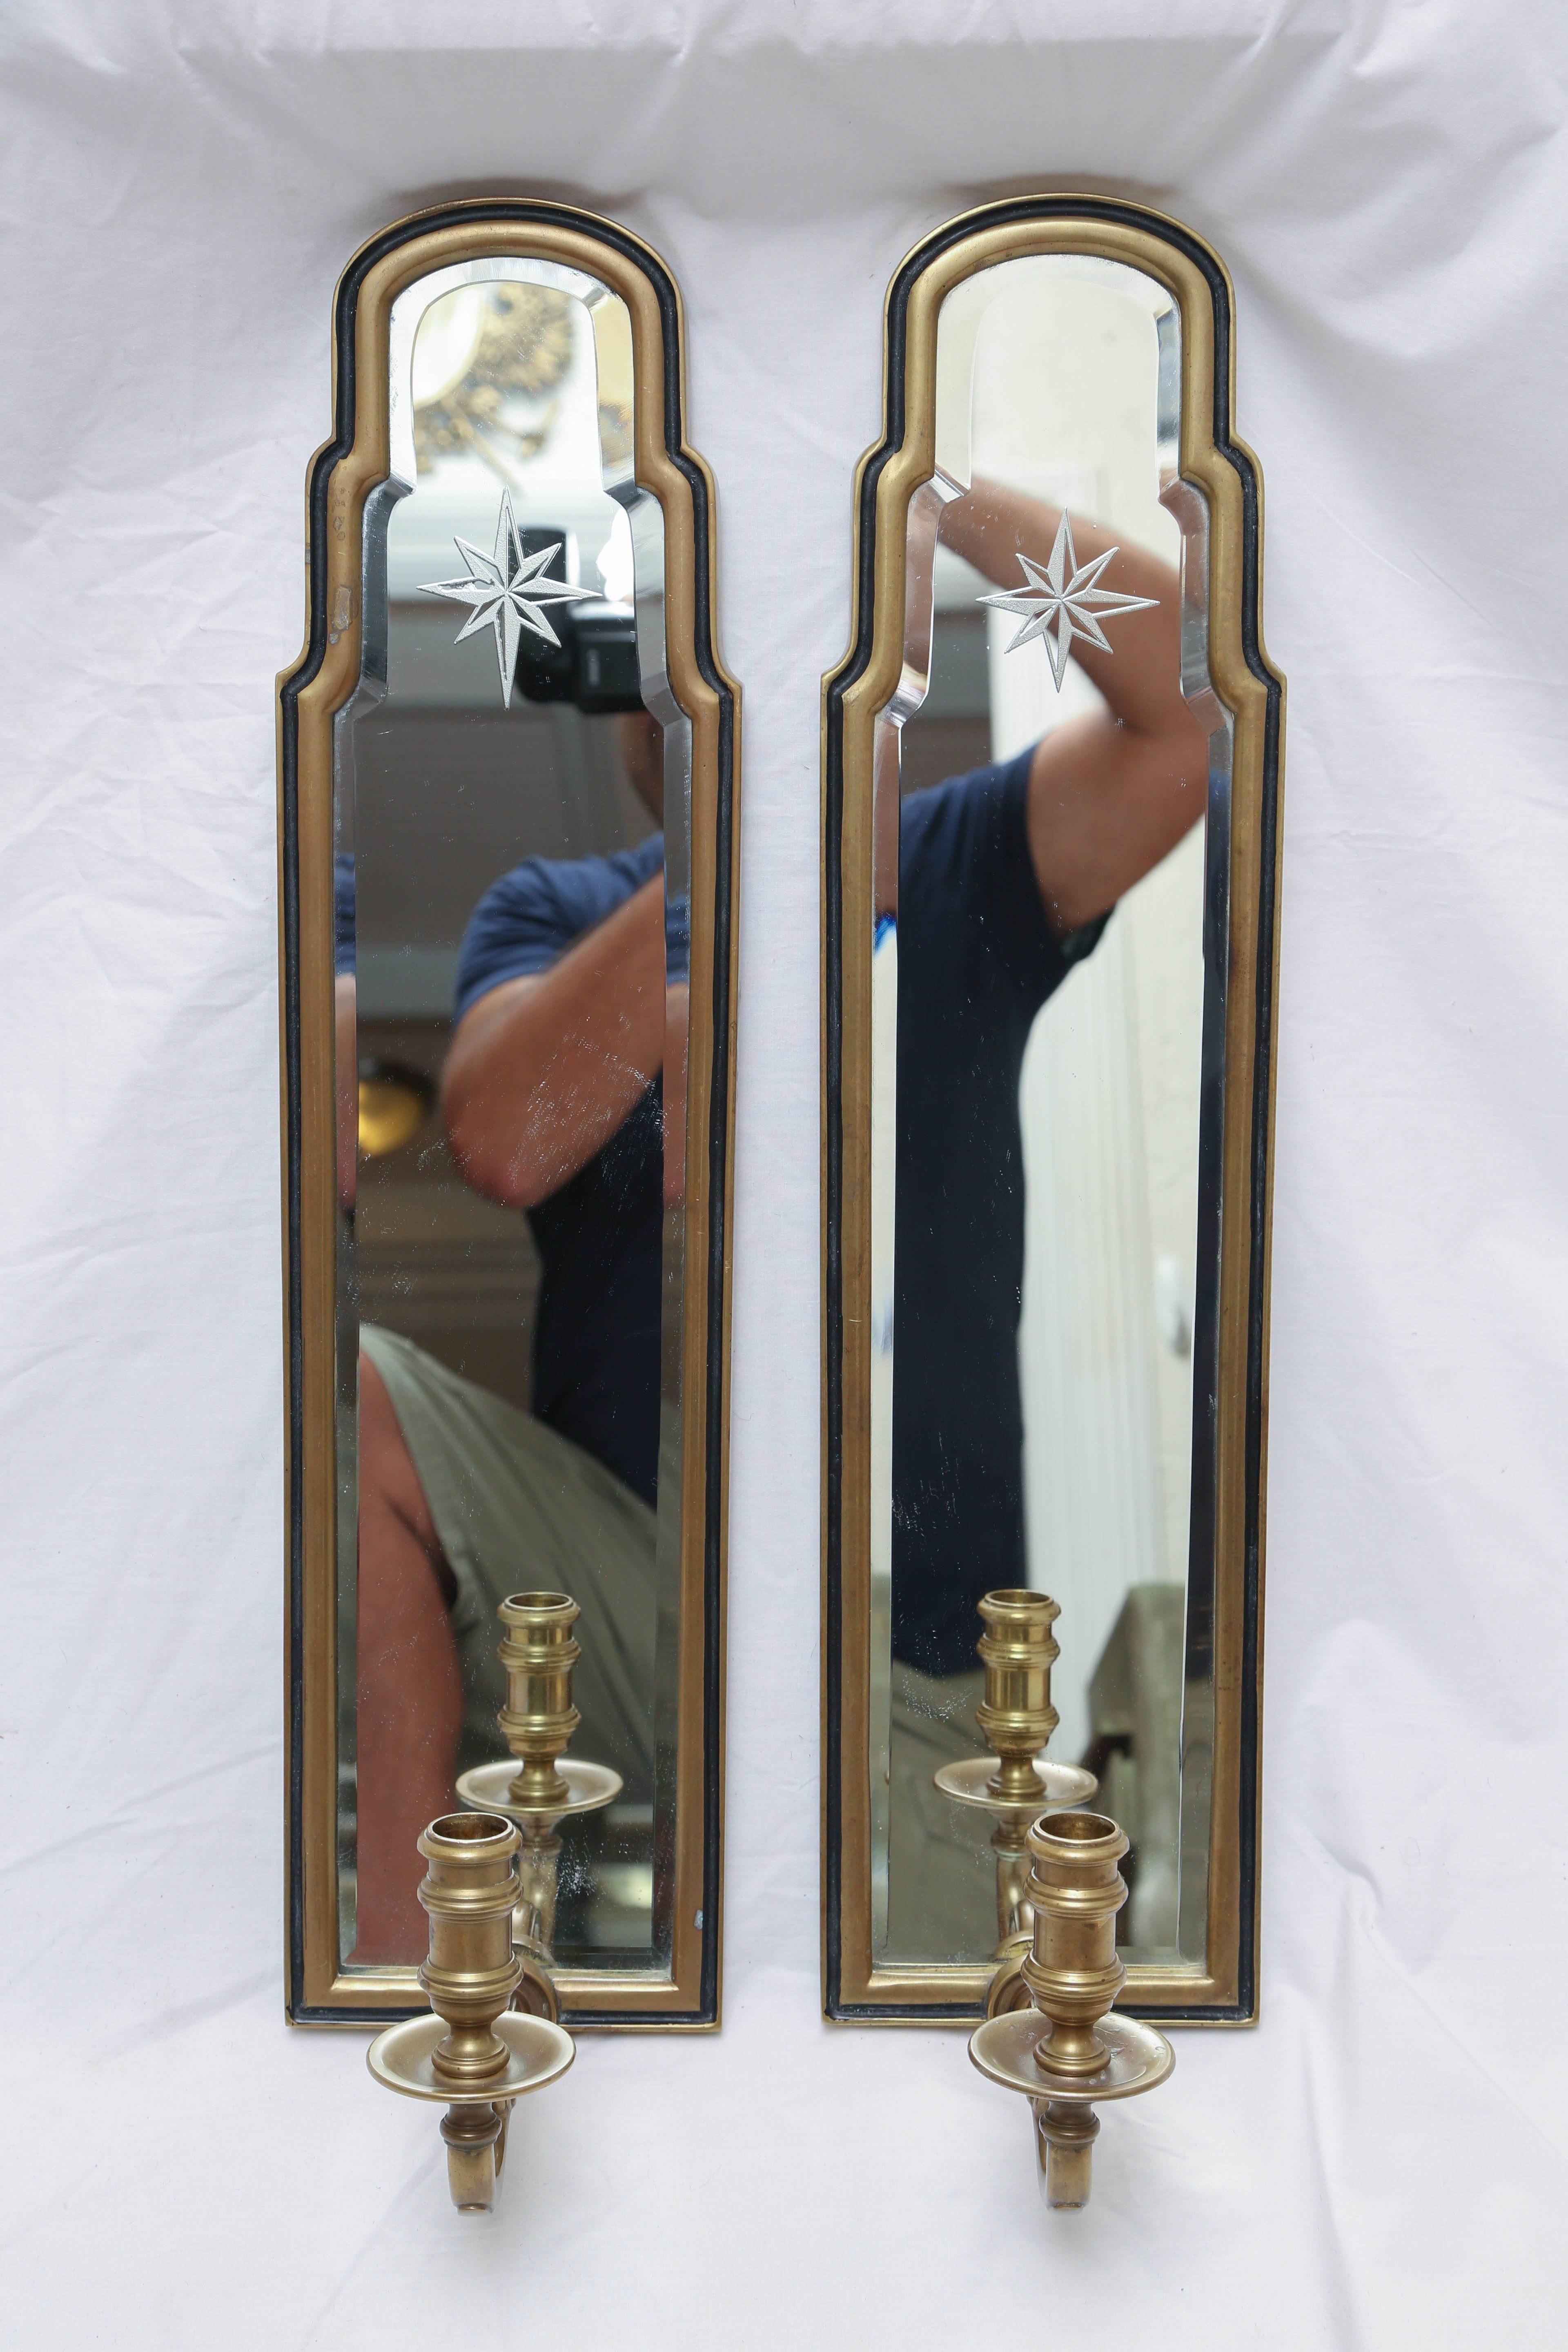 Vintage pair of Chapman mirrored sconces (non electrified) with etched starburst design near top. Solid brass frames.